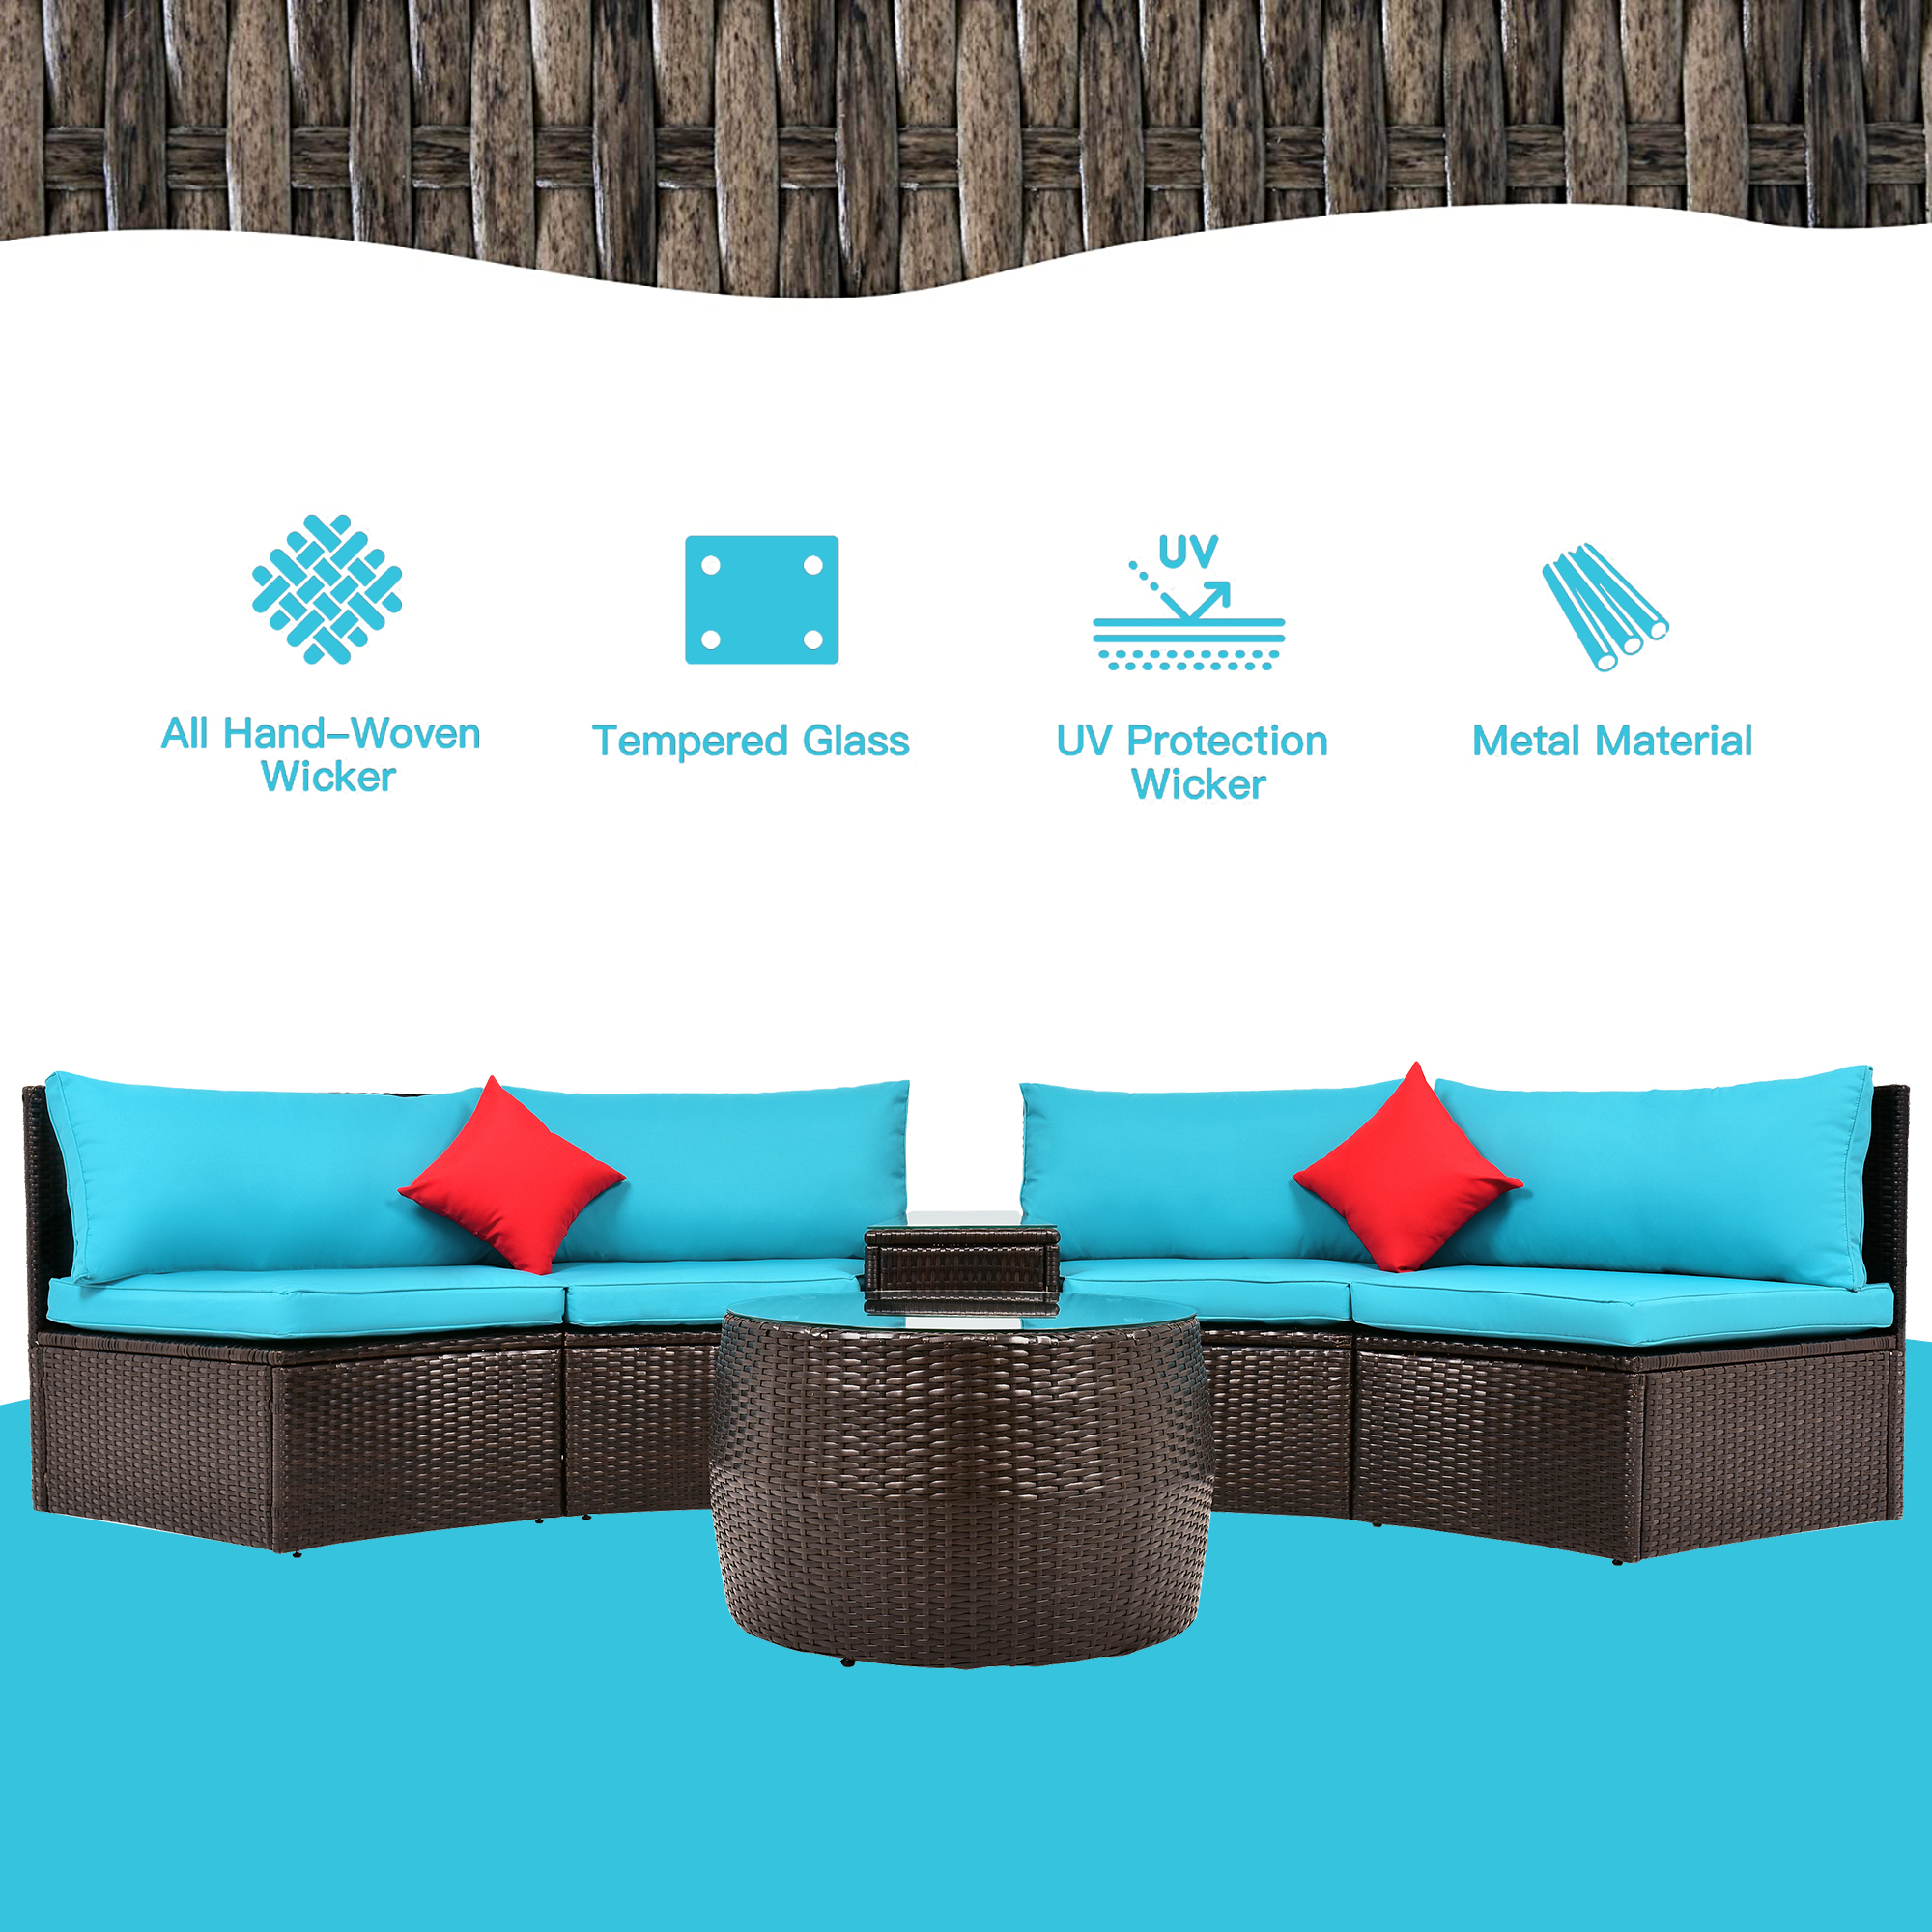 4PCS Outdoor Patio Furniture Sets, Patio Rattan Wicker Half-Moon Sectional Furniture Conversation Sets with 2 Pillows, Coffee Table and Side Table, Backyard Wicker Outdoor Companion Sets, S1617 - image 4 of 9